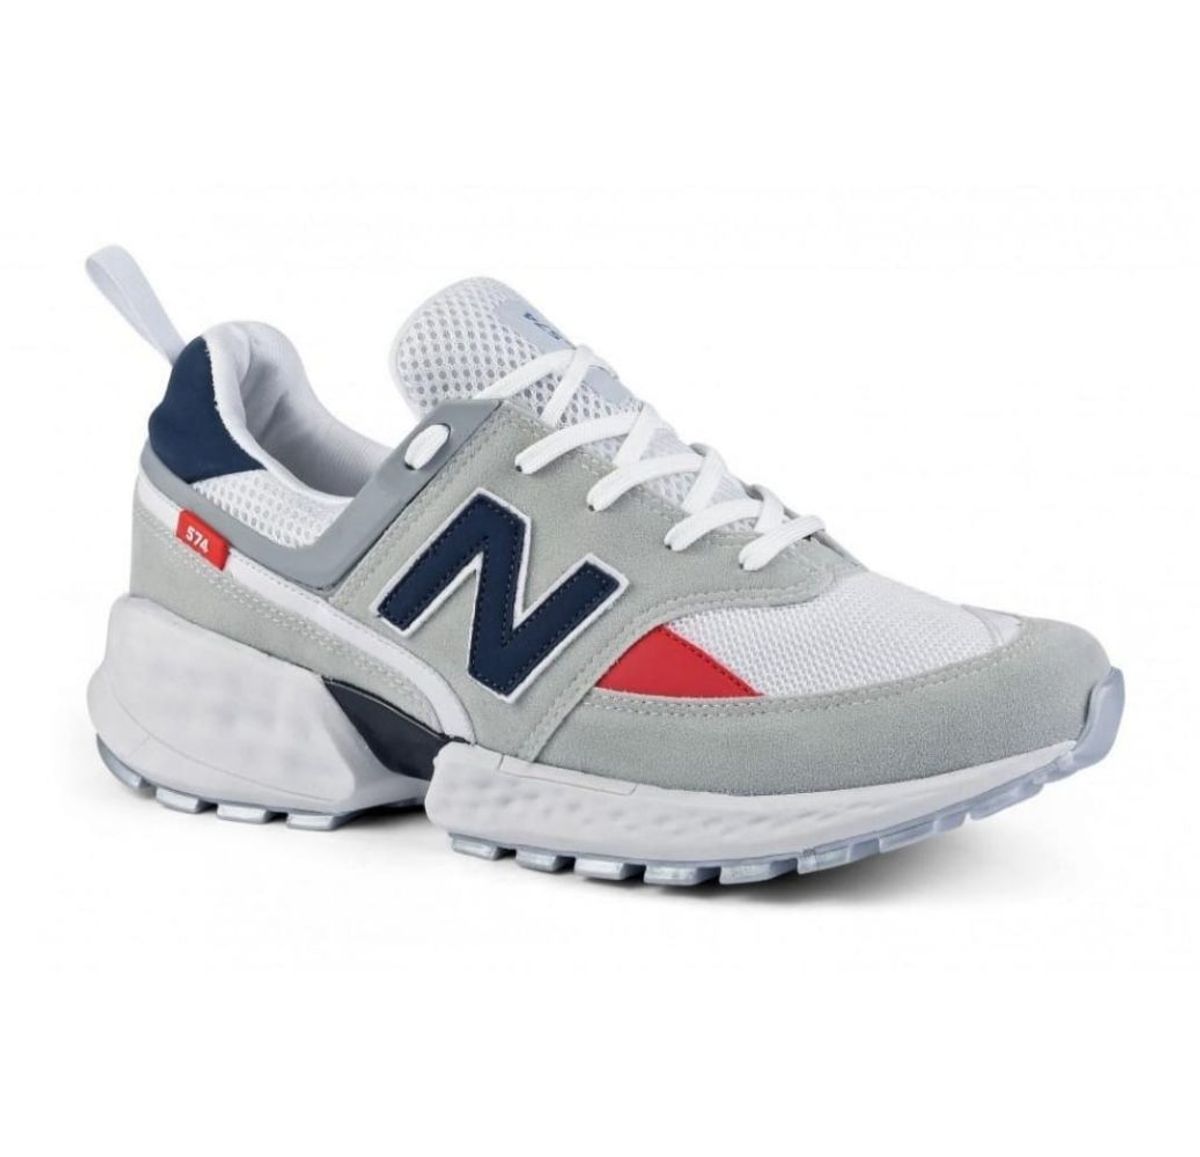 New Balance 574 Sport V2 Available Now